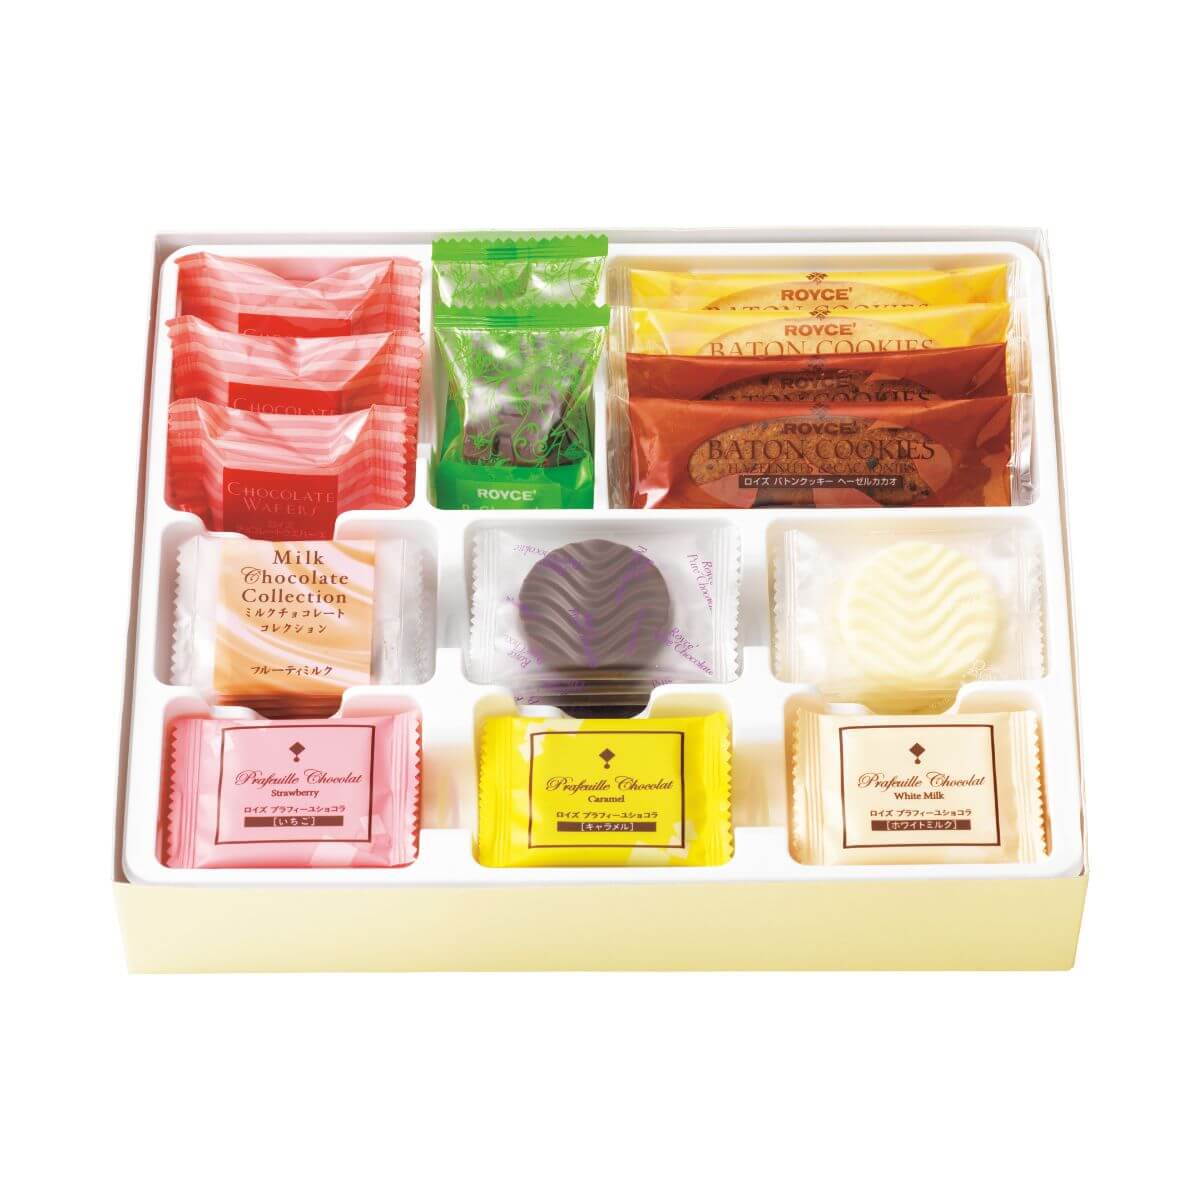 ROYCE' Chocolate - Chocolat No Shiki "Hokkaido" - Image shows an open box with a yellow lower front and individually-wrapped confections in different shapes and in the colors of pink, yellow, green, orange, brown, blue, and white. Visible text says Chocolate Wafers, ROYCE' Baton Cookies, Milk Chocolate Collection, Prafeuille Chocolat "Strawberry", Prafeuille Chocolat "Caramel", Prafeuille Chocolat "White Milk". Background is in white.